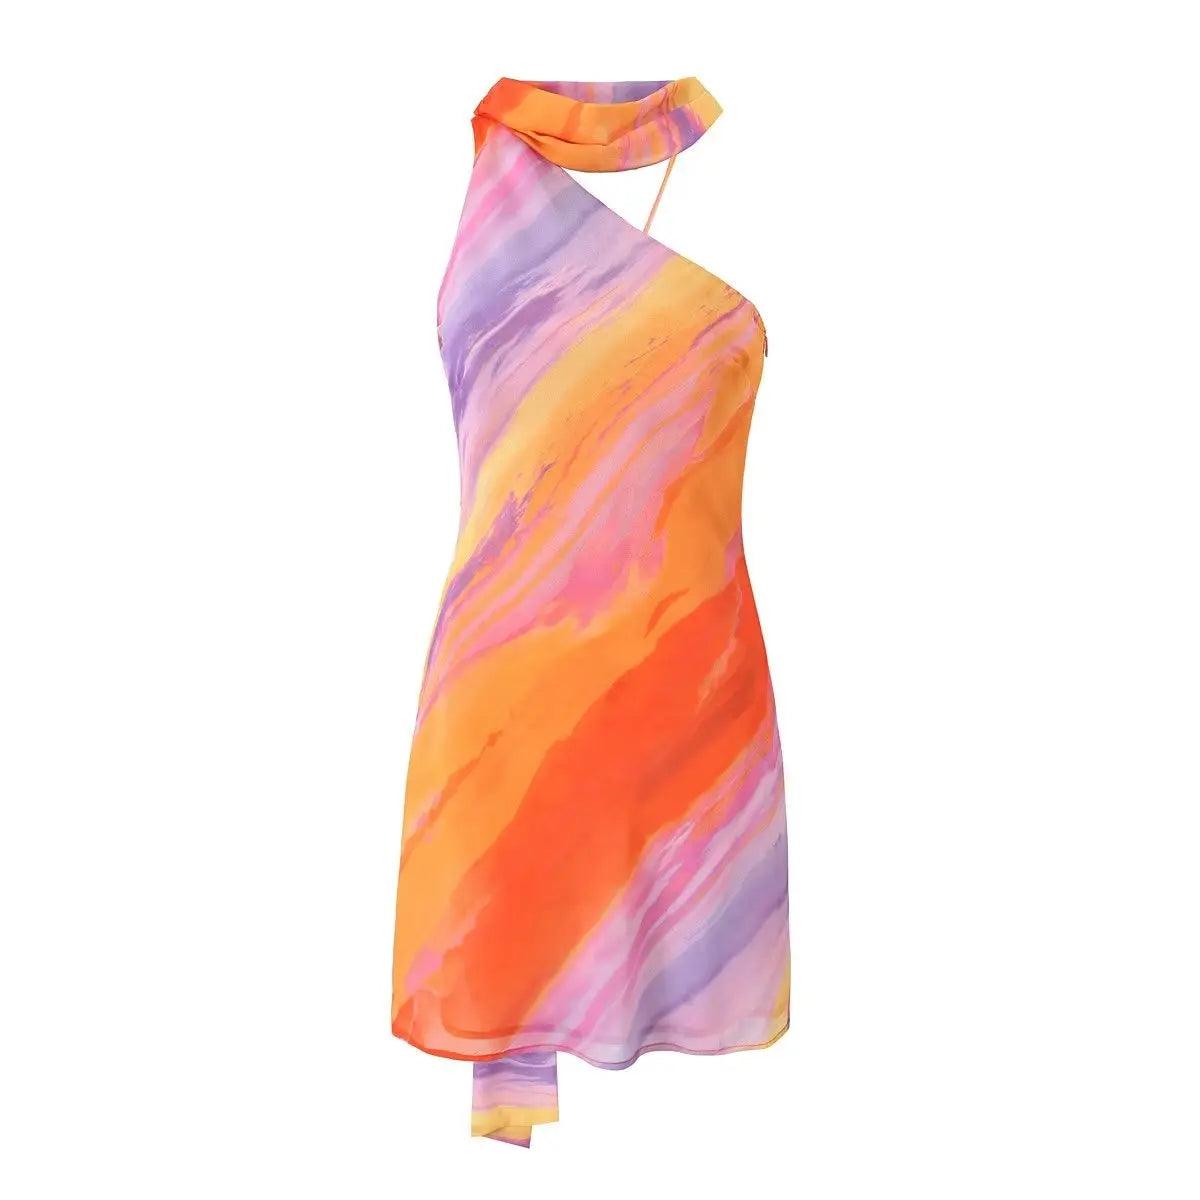 Sunset Beach Mini Dress from The House of CO-KY - Dresses